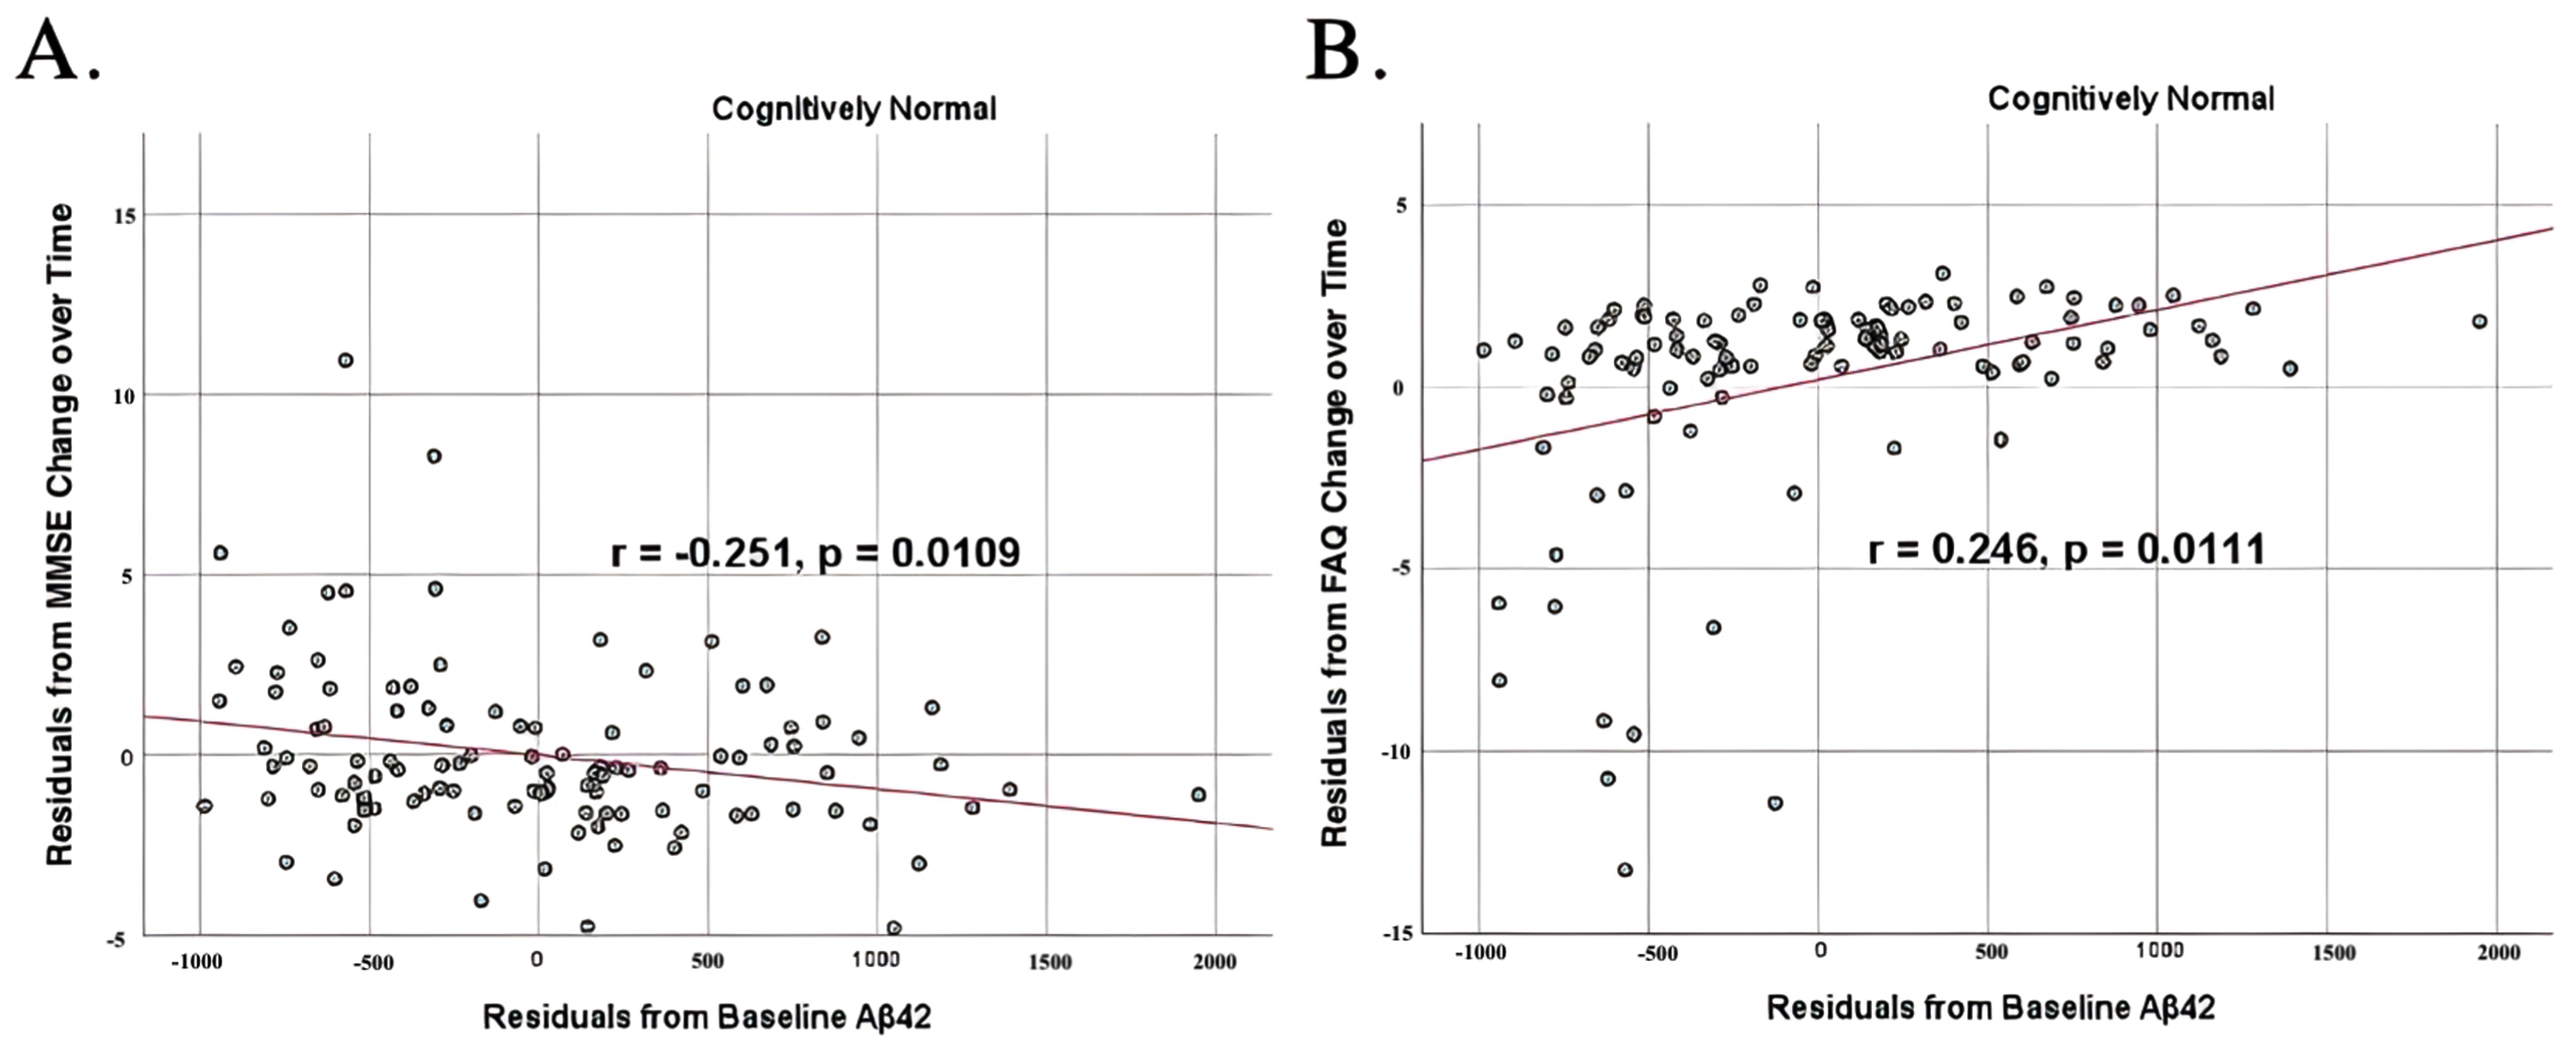 Partial correlations between baseline Aβ42 concentration and neurocognitive function decline in normal controls, corrected for age and education. Scatterplots above are corrected for age and education. A) Aβ42 versus MMSE (r = –0.251, p = 0.0109). B) Aβ42 versus FAQ (r = 0.246, p = 0.0111).